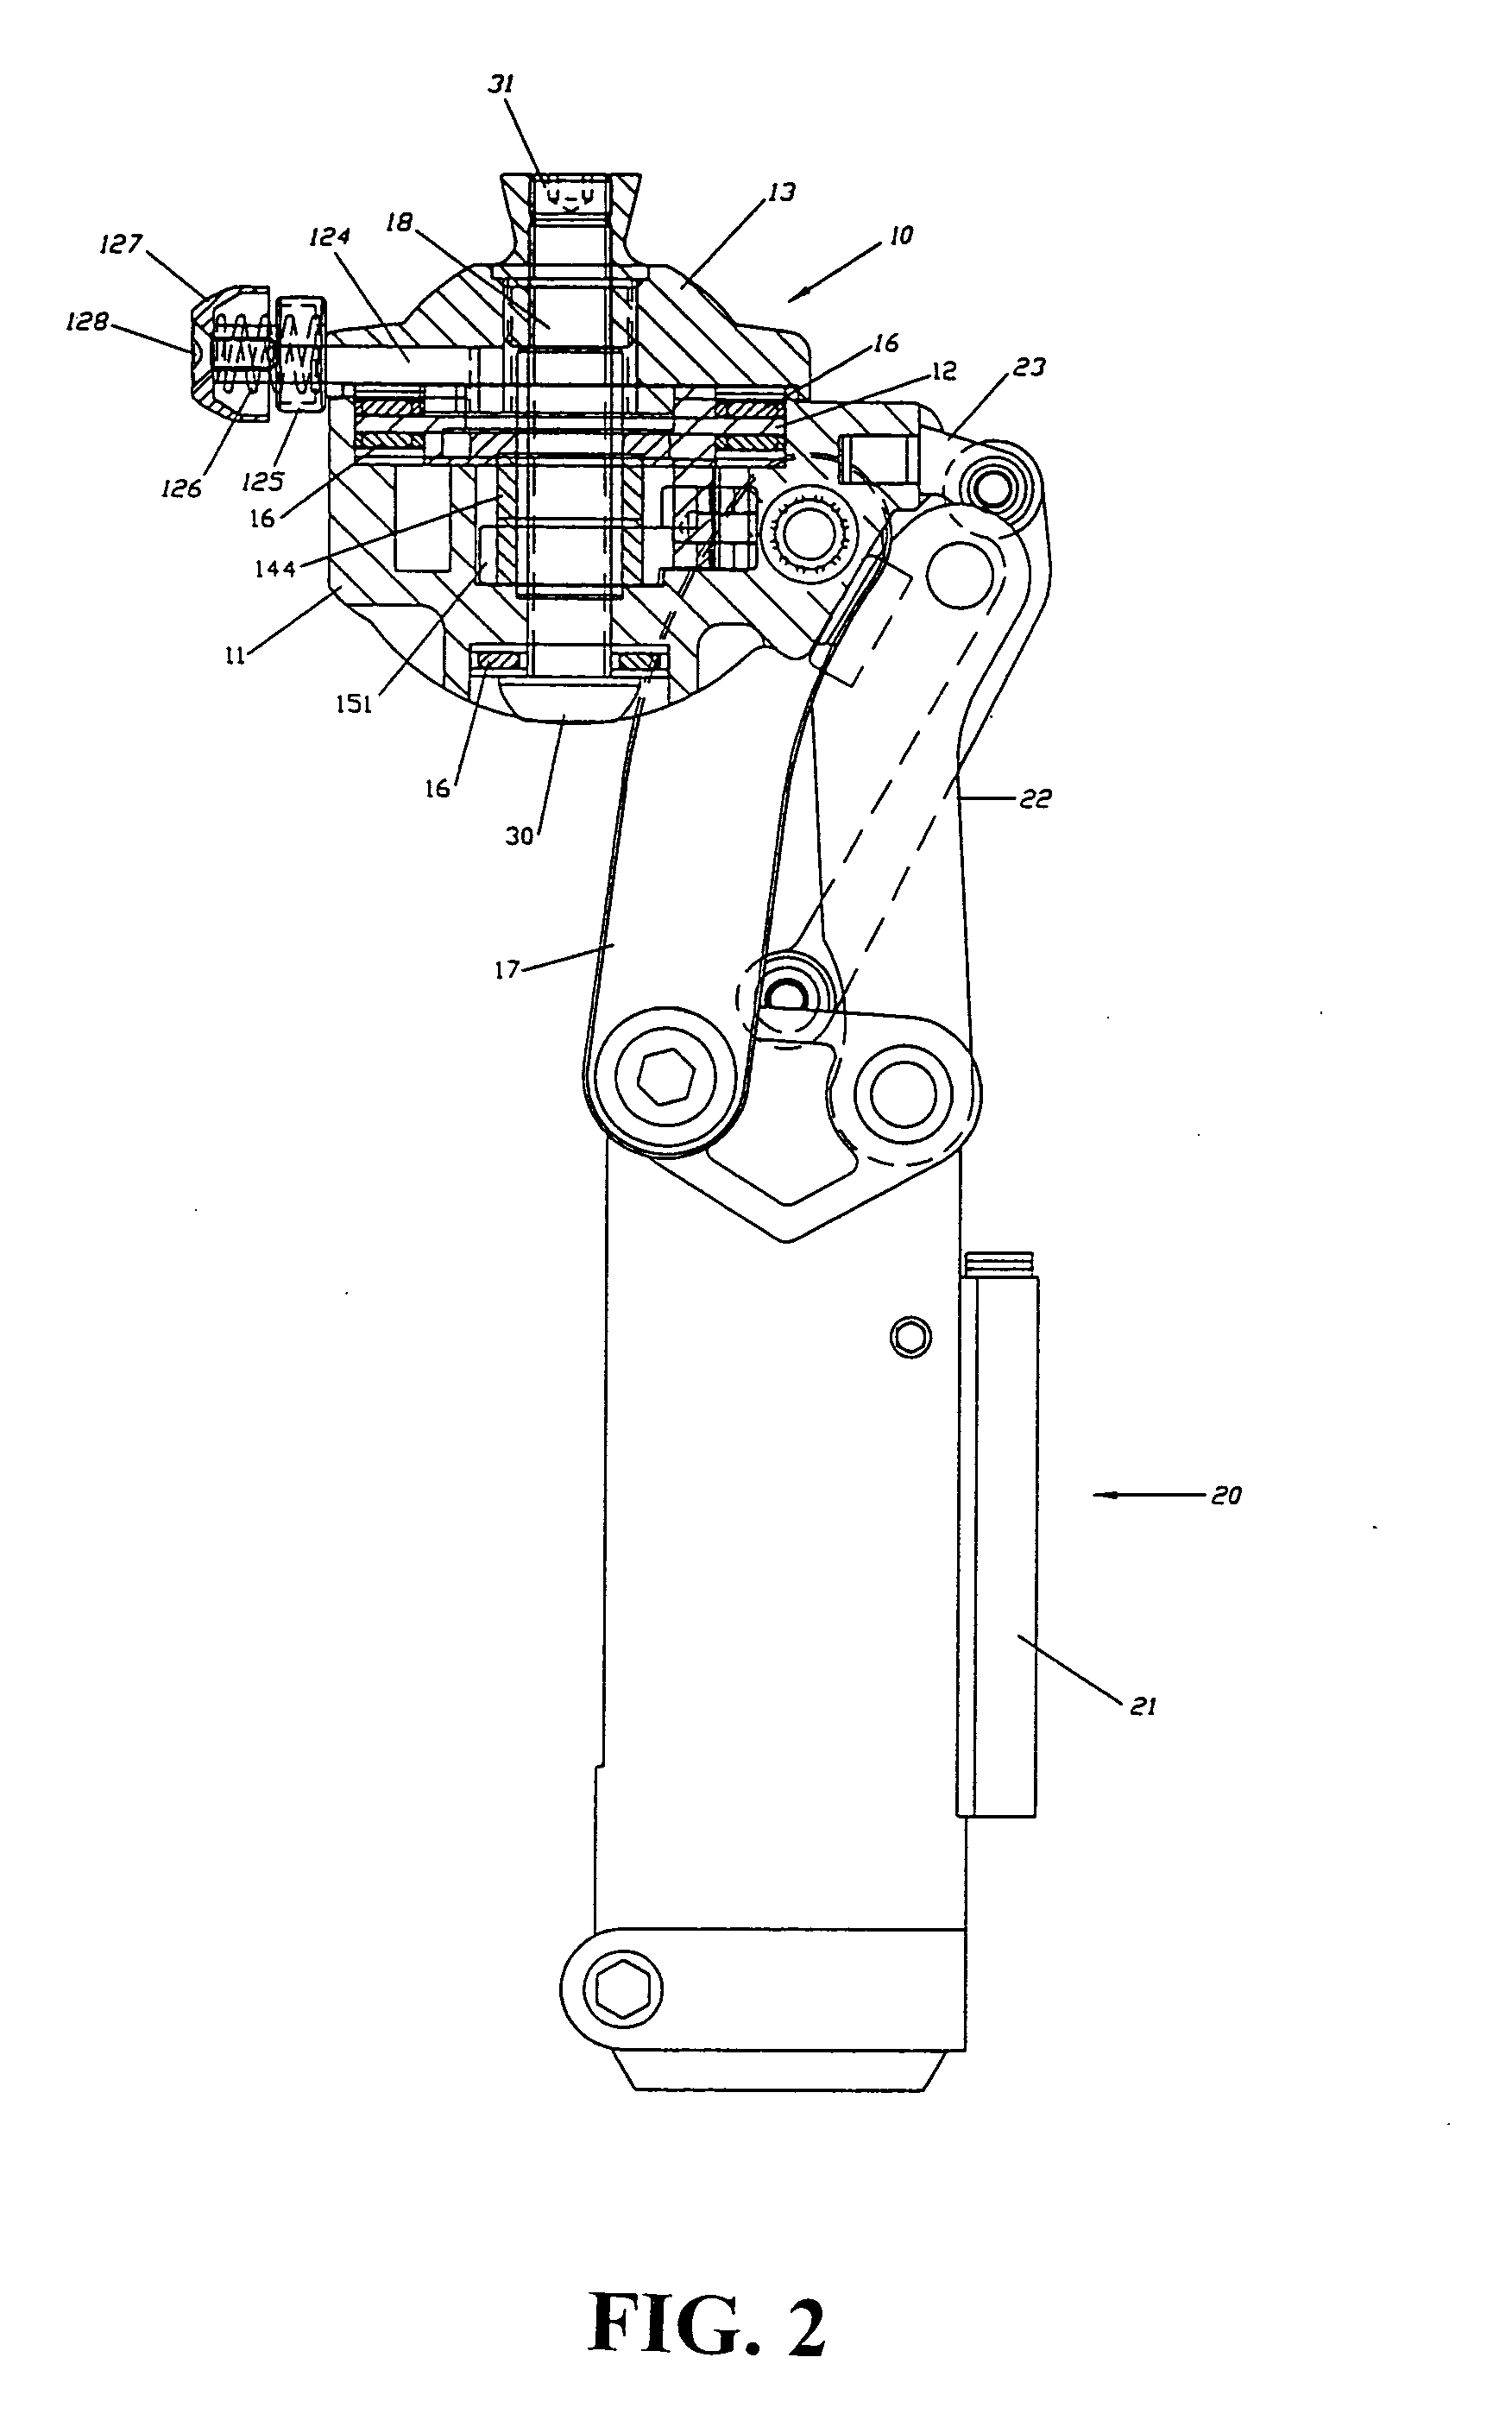 Rotating pneumatic knee joint structure